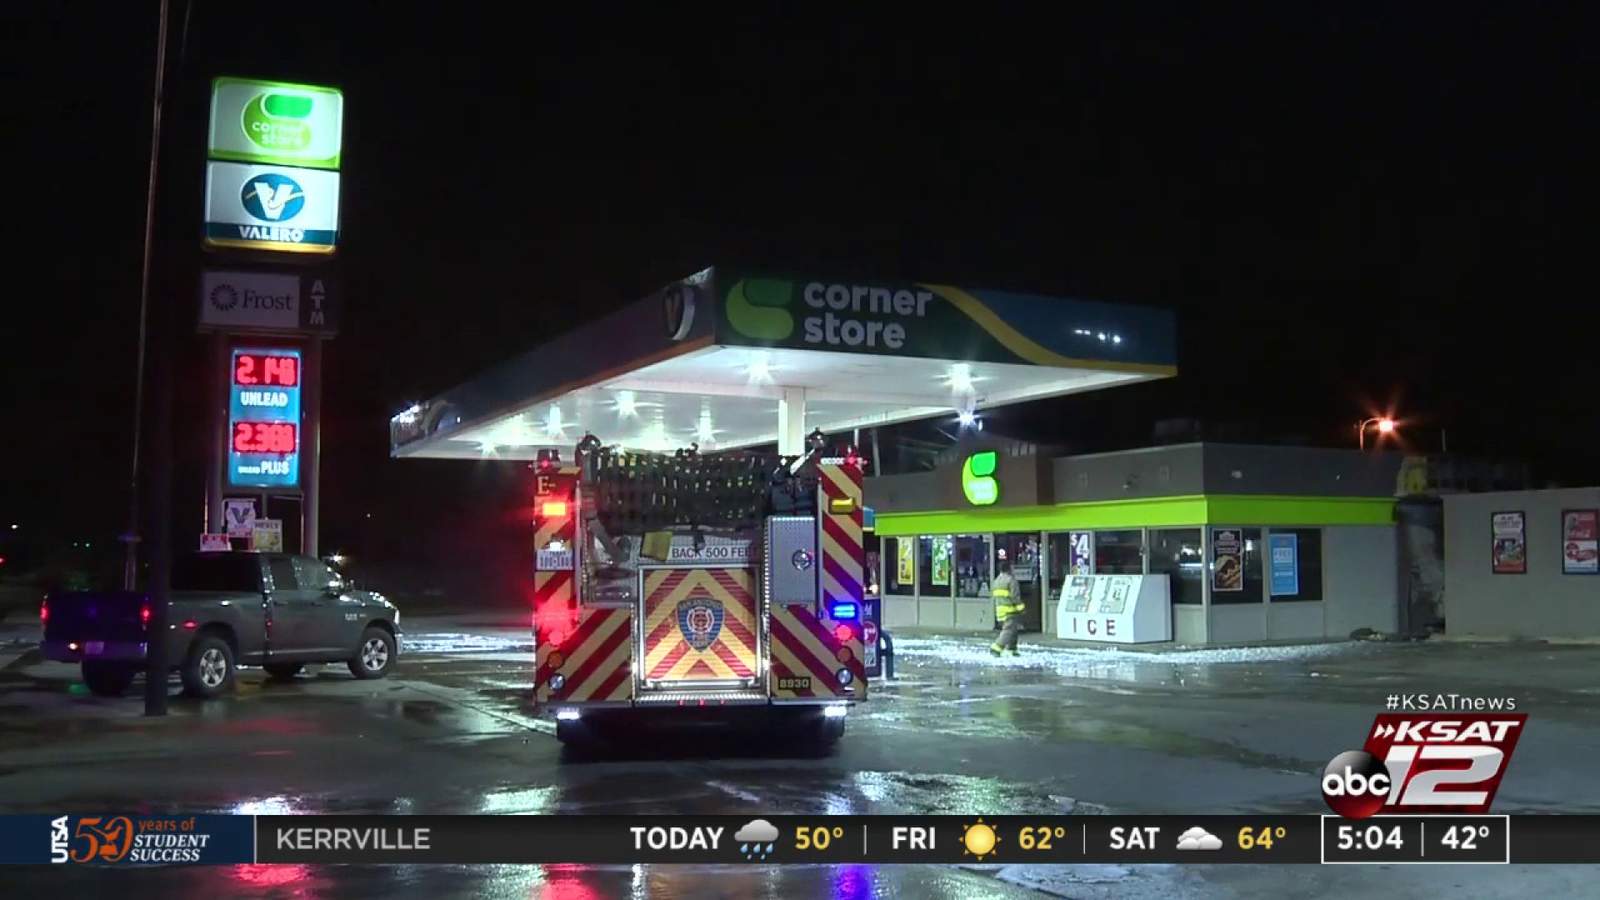 SAFD: Customer pulls up to gas station, spots fire outside closed convenience store